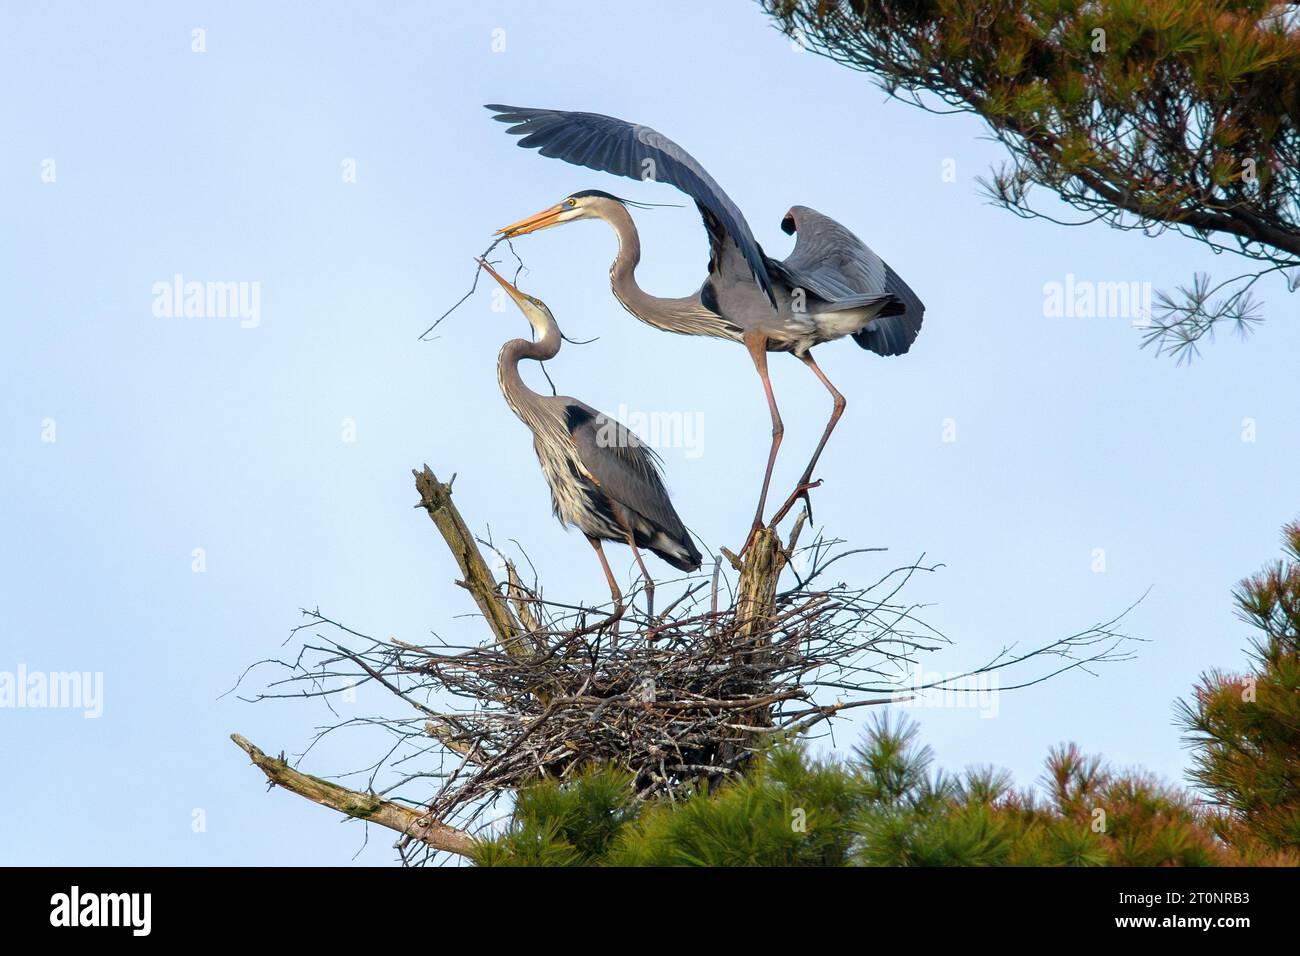 A pair of Great Blue Herons constructing their nest in the early spring in Methuen Massachusetts. Stock Photo